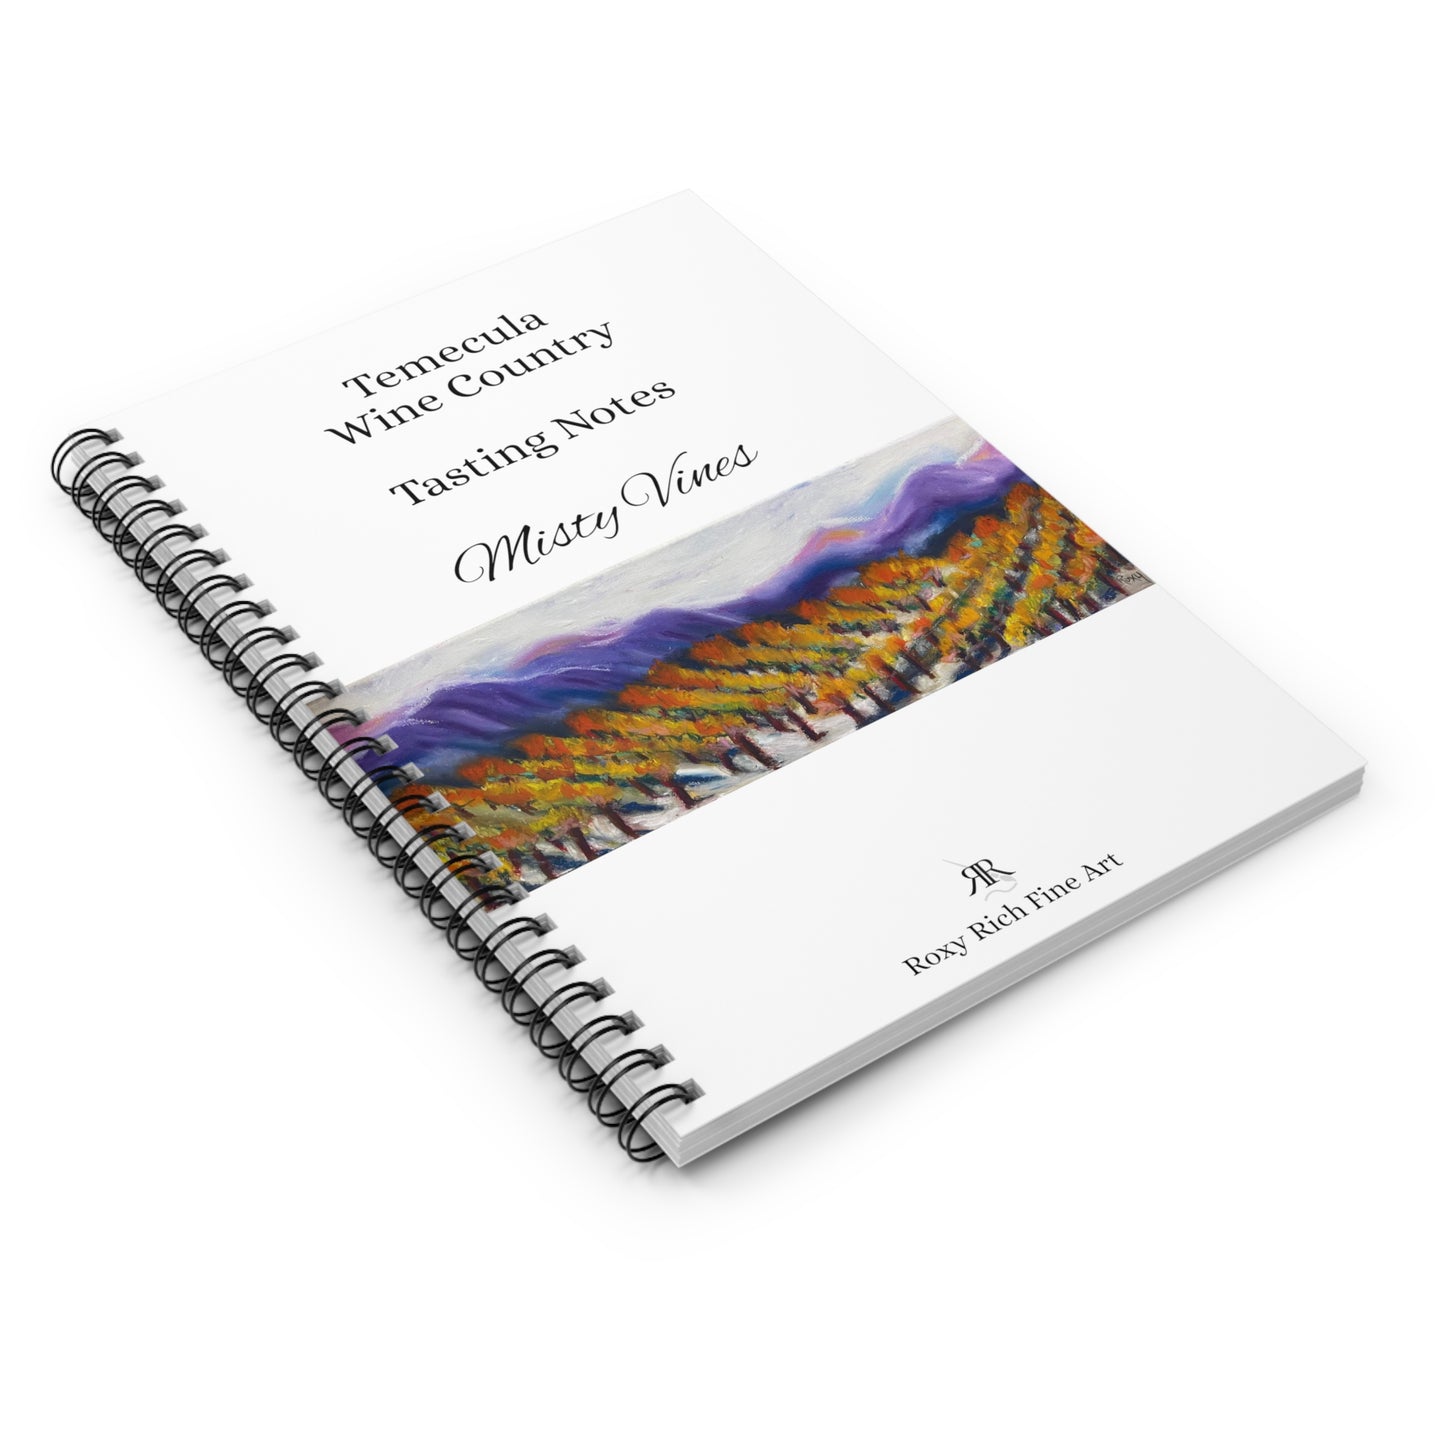 Temecula Wine Country Tasting Notes  "Misty Vines" Spiral Notebook